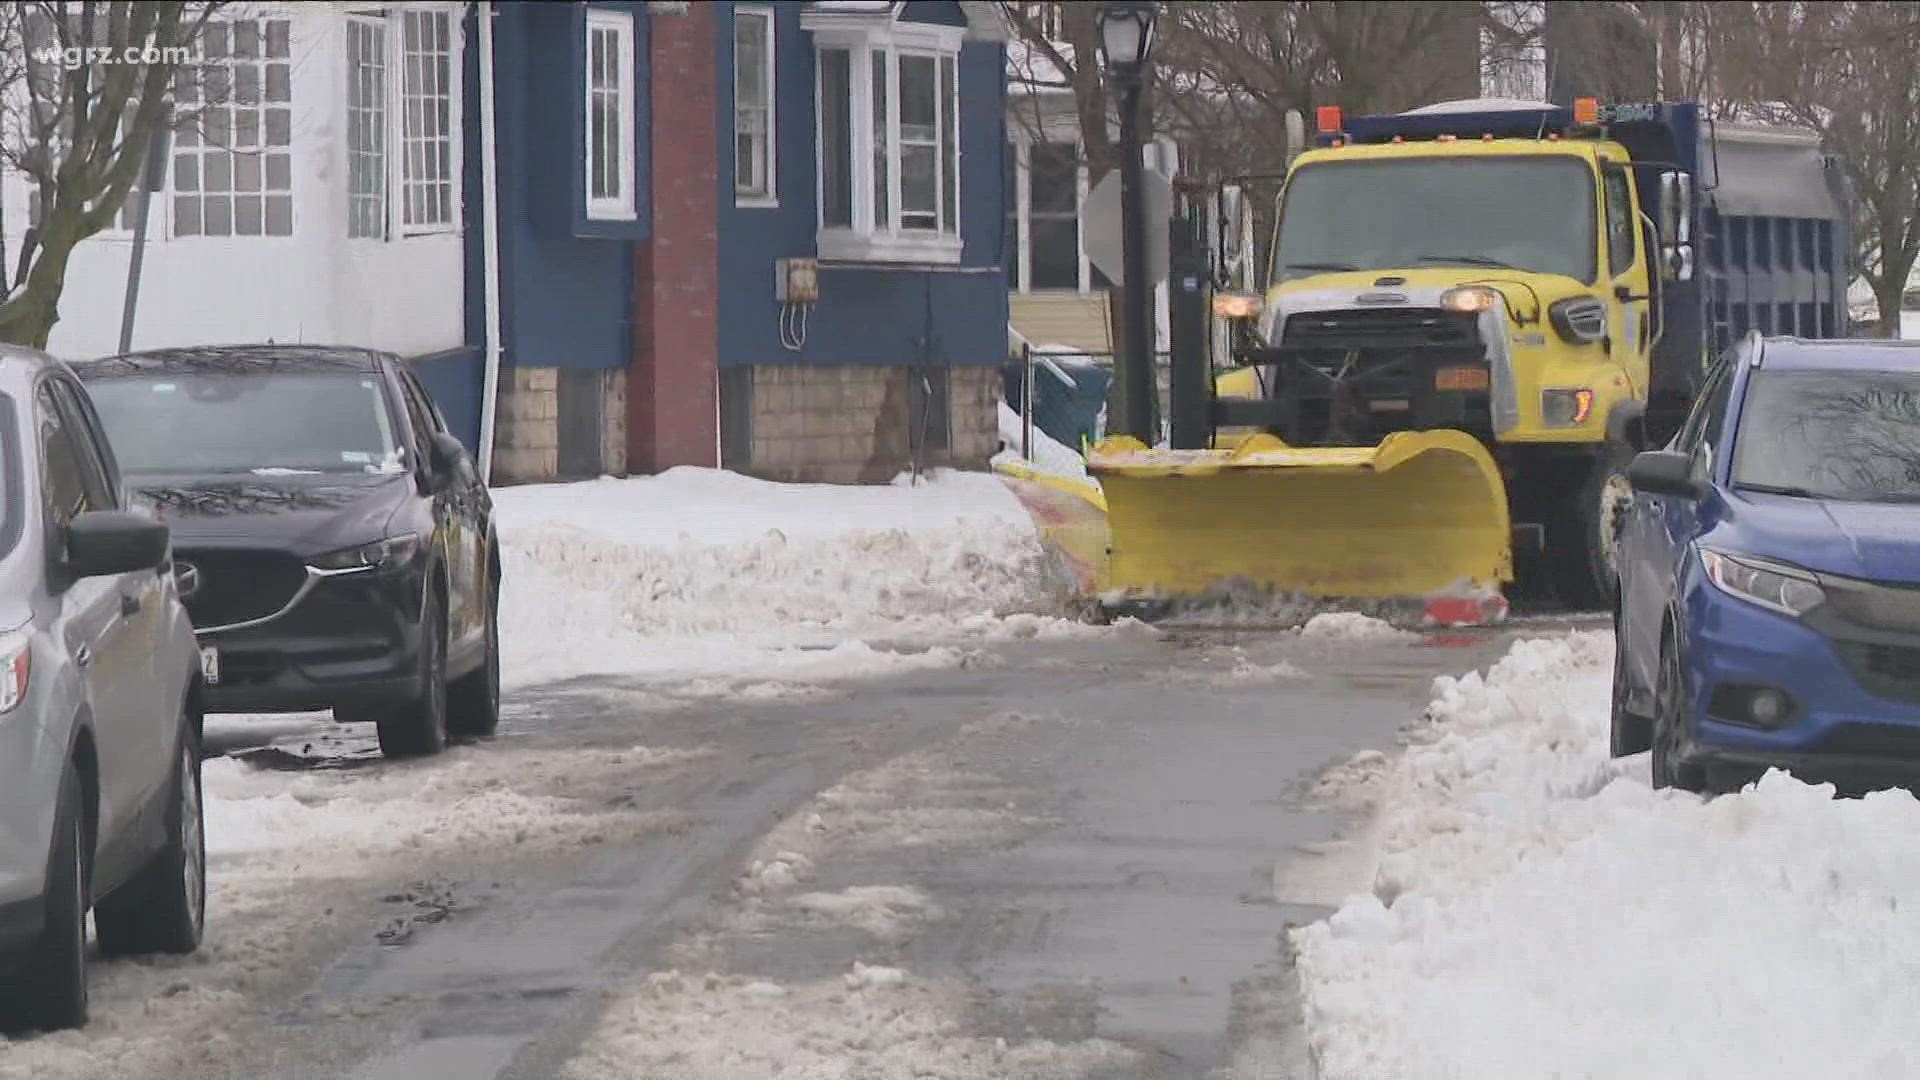 Buffalo snow storm: City to tow cars to clear streets